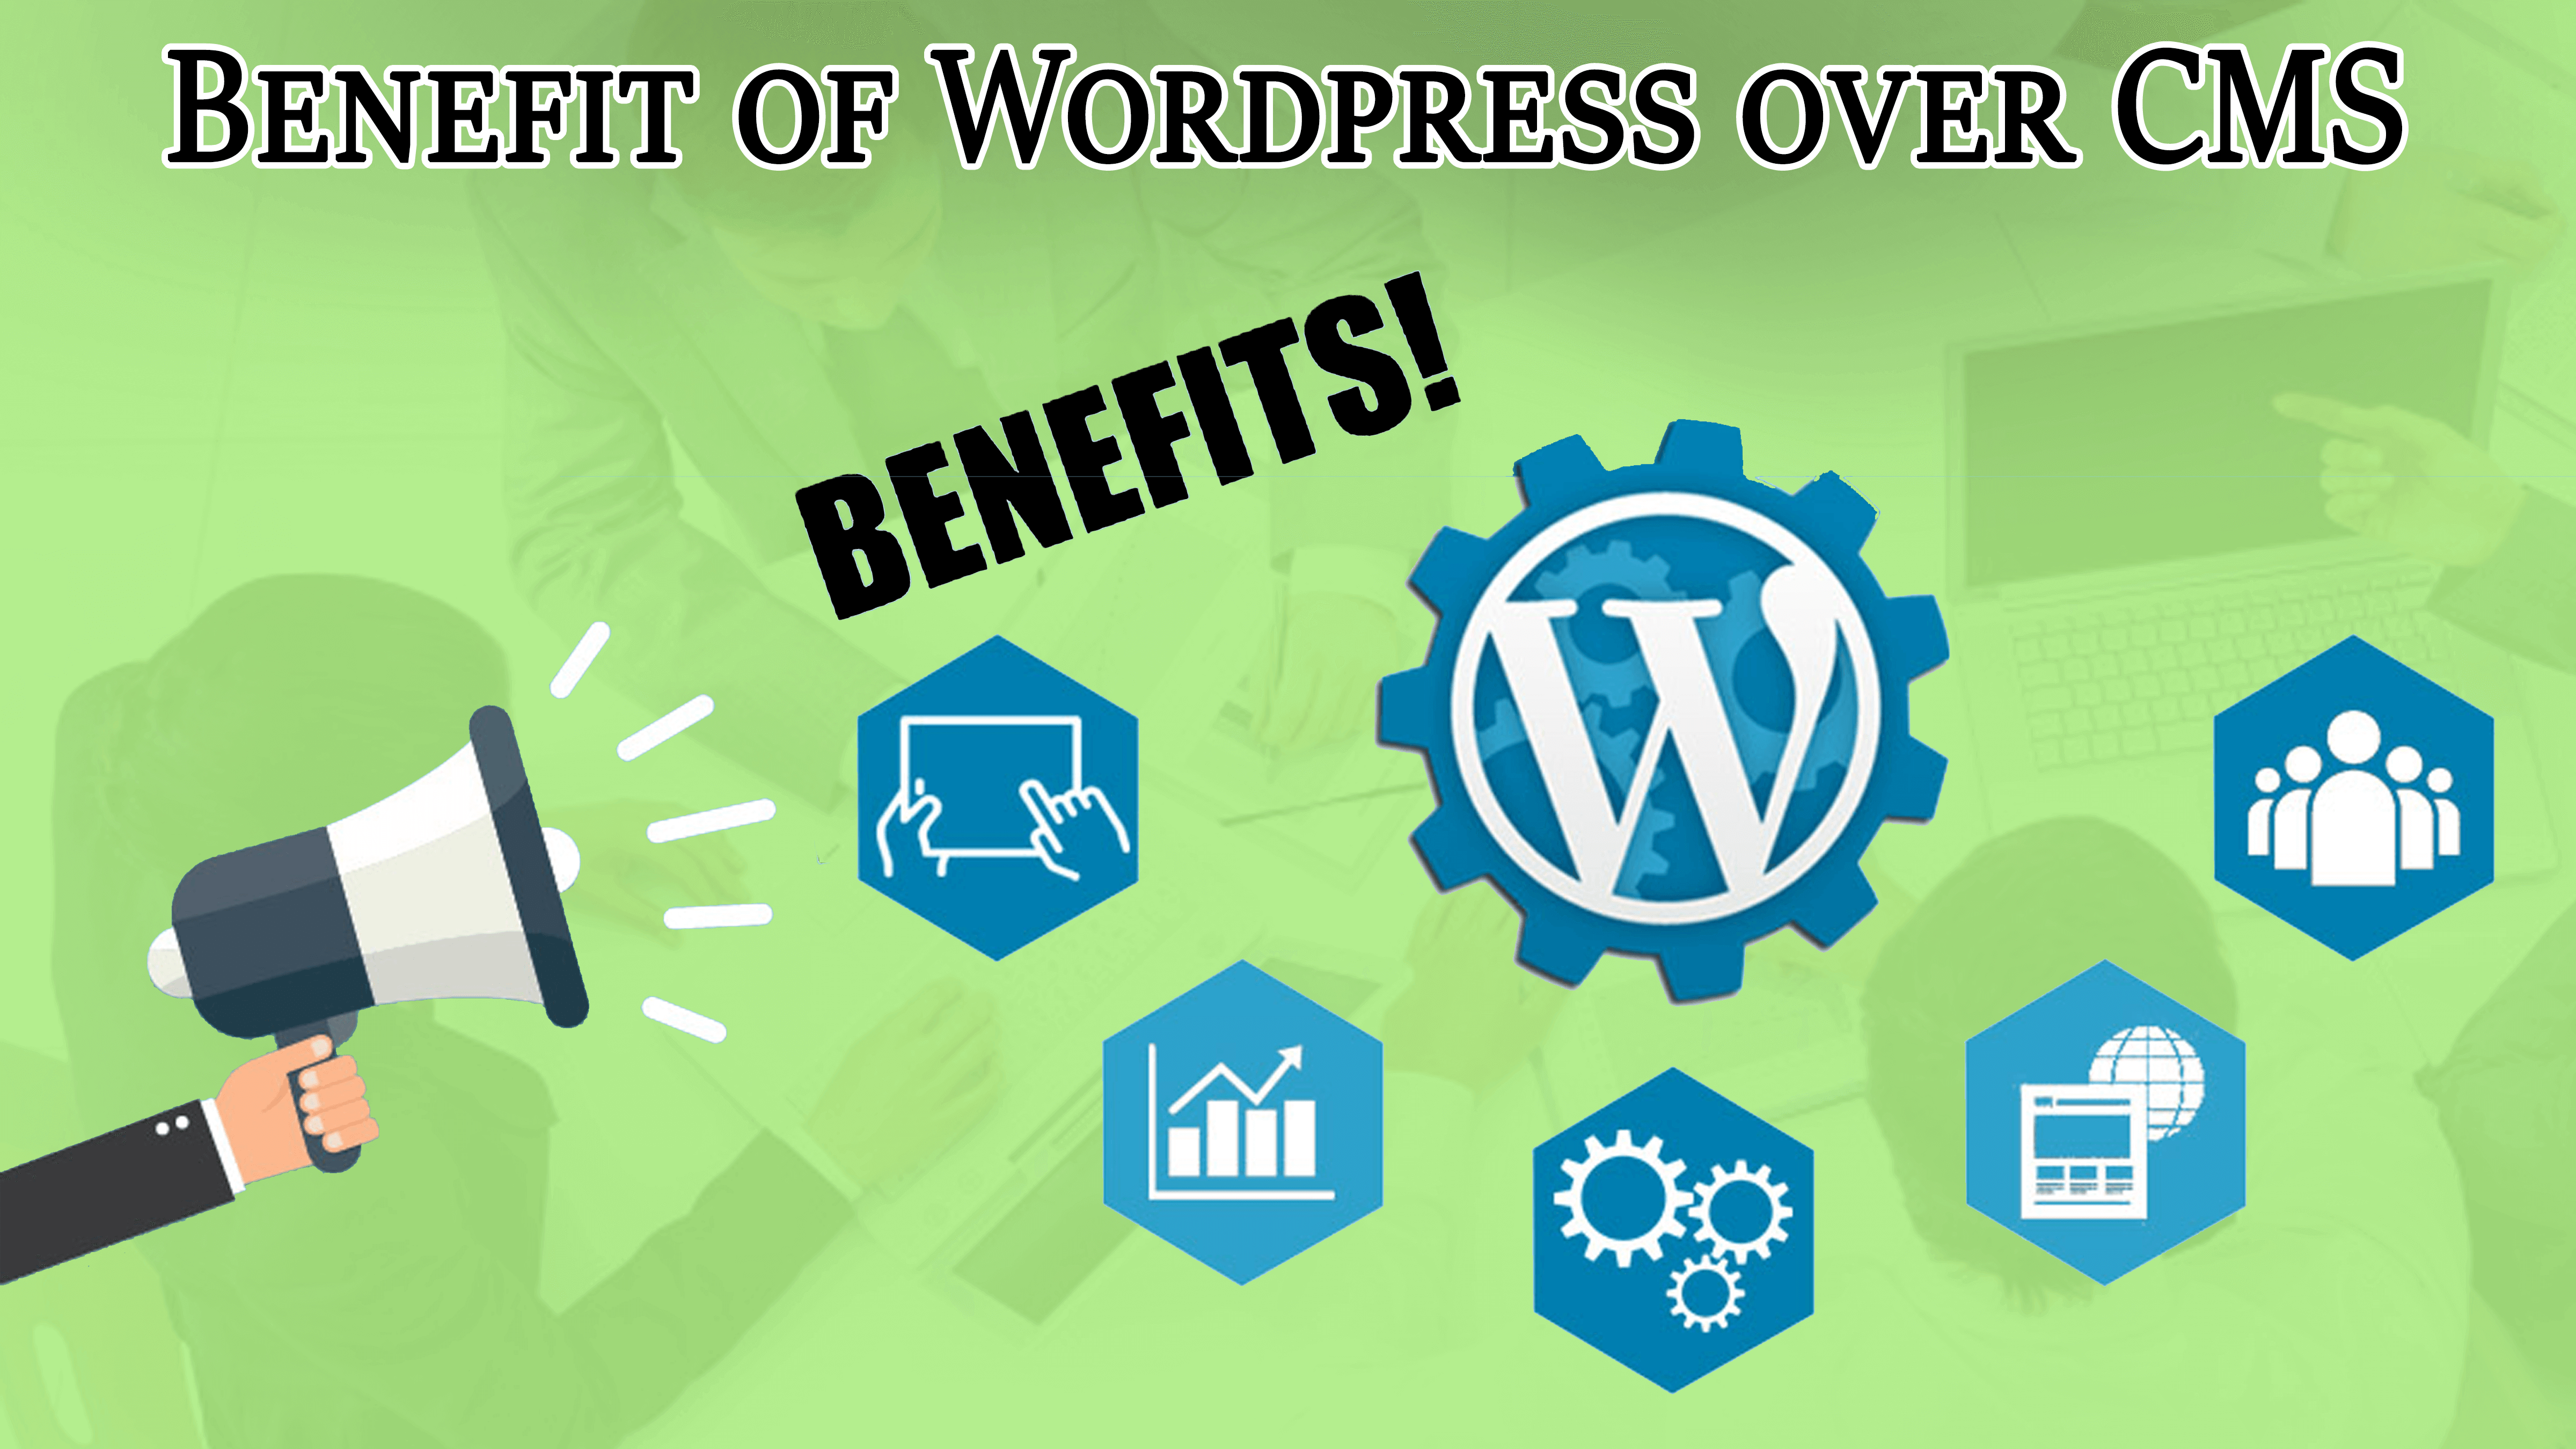 Benefits of wordpress over other CMS theme nepal